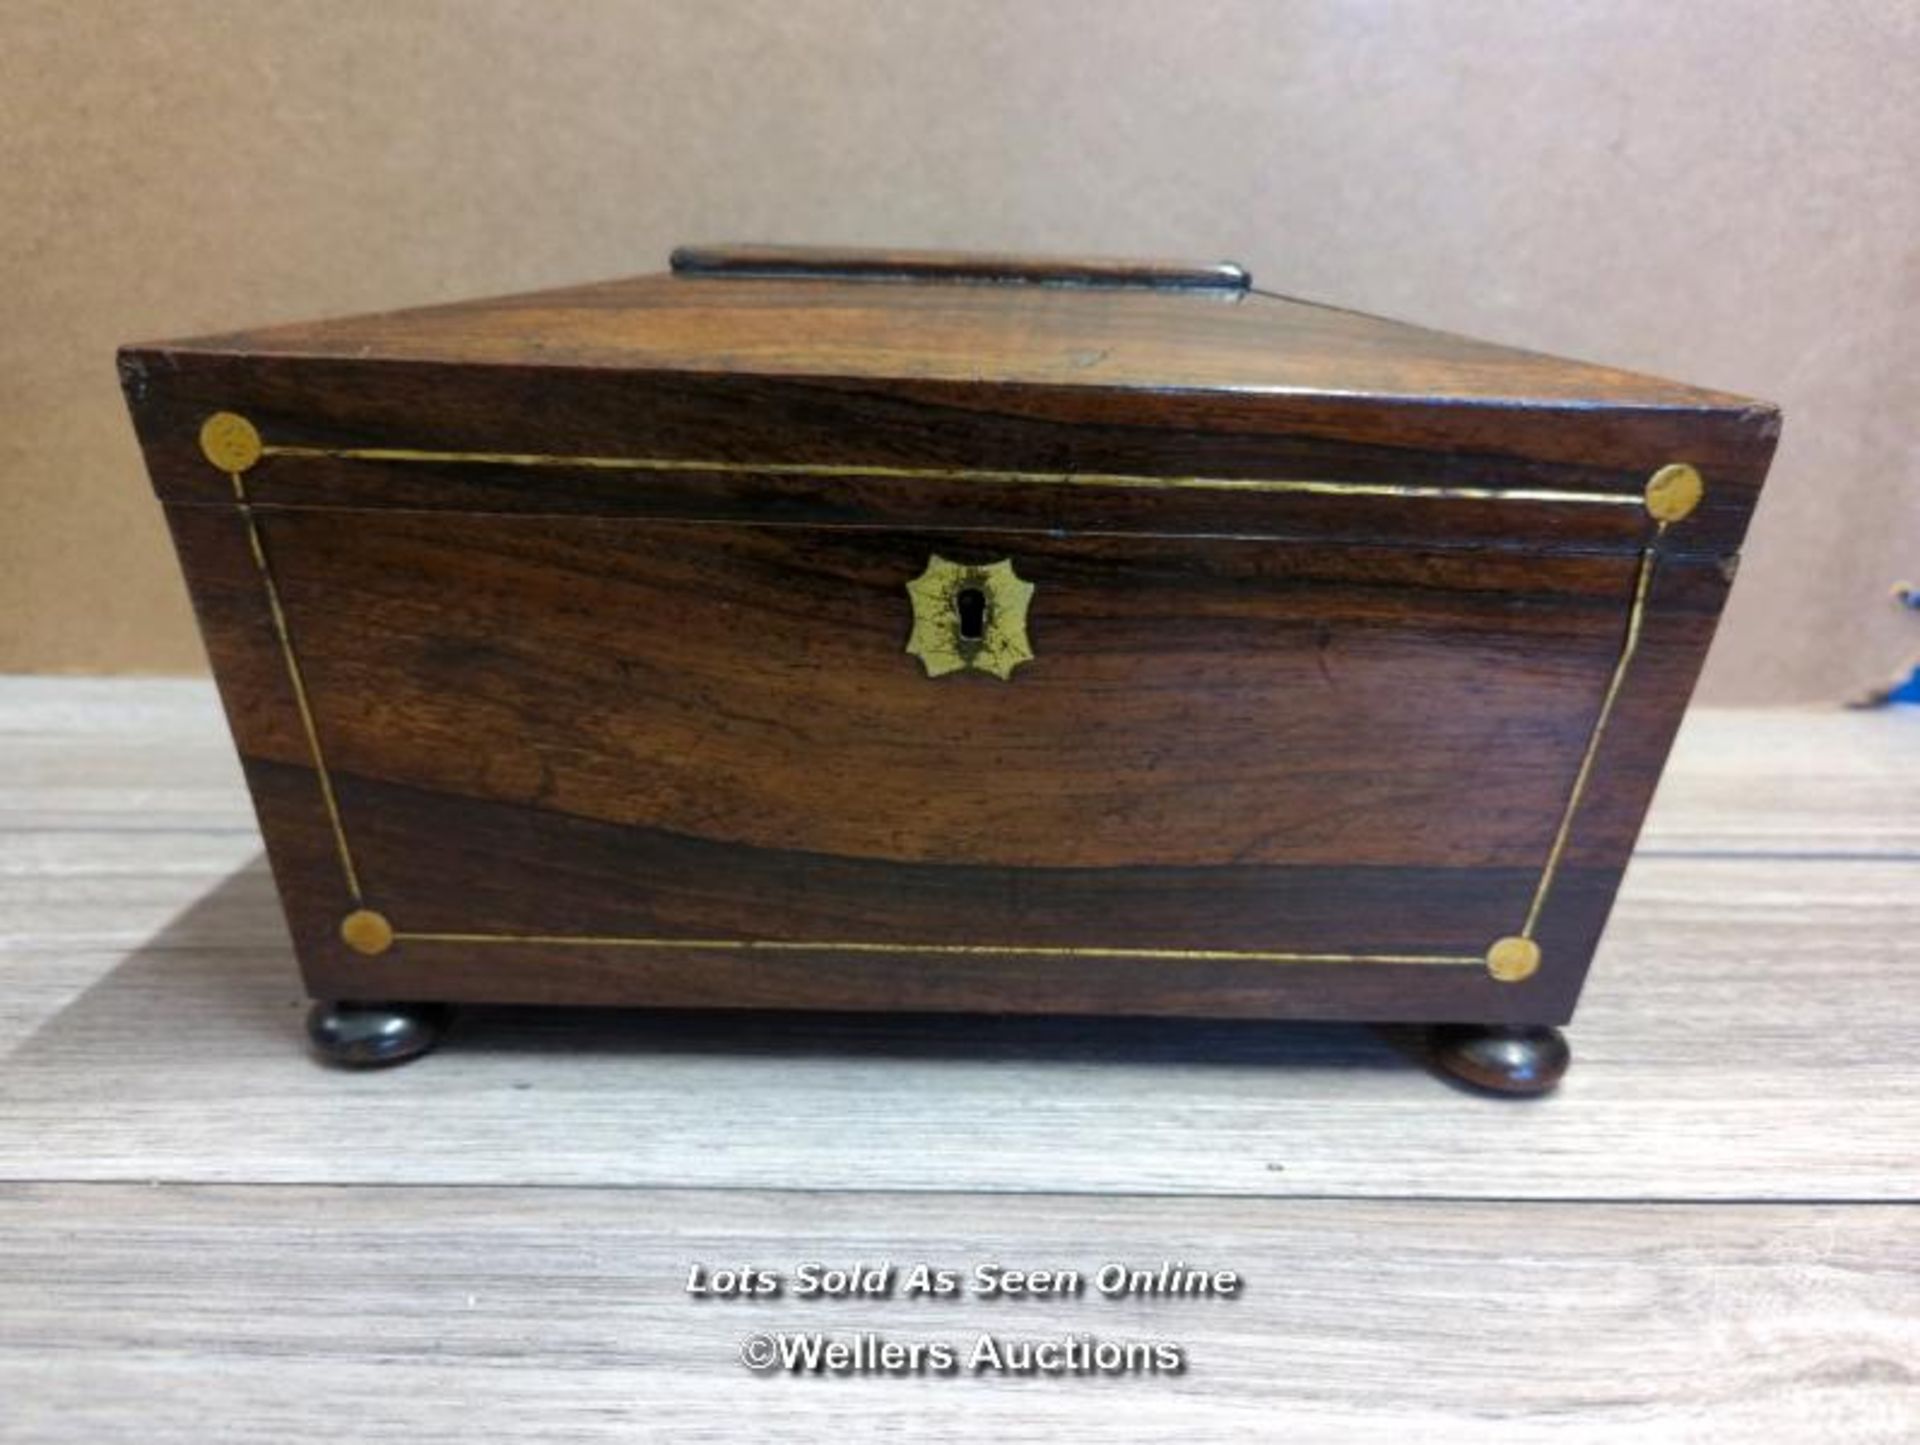 REGENCY BRASS INLAID ROSEWOOD SARCOPHAGUS SHAPED TEA CADDY - Image 5 of 6